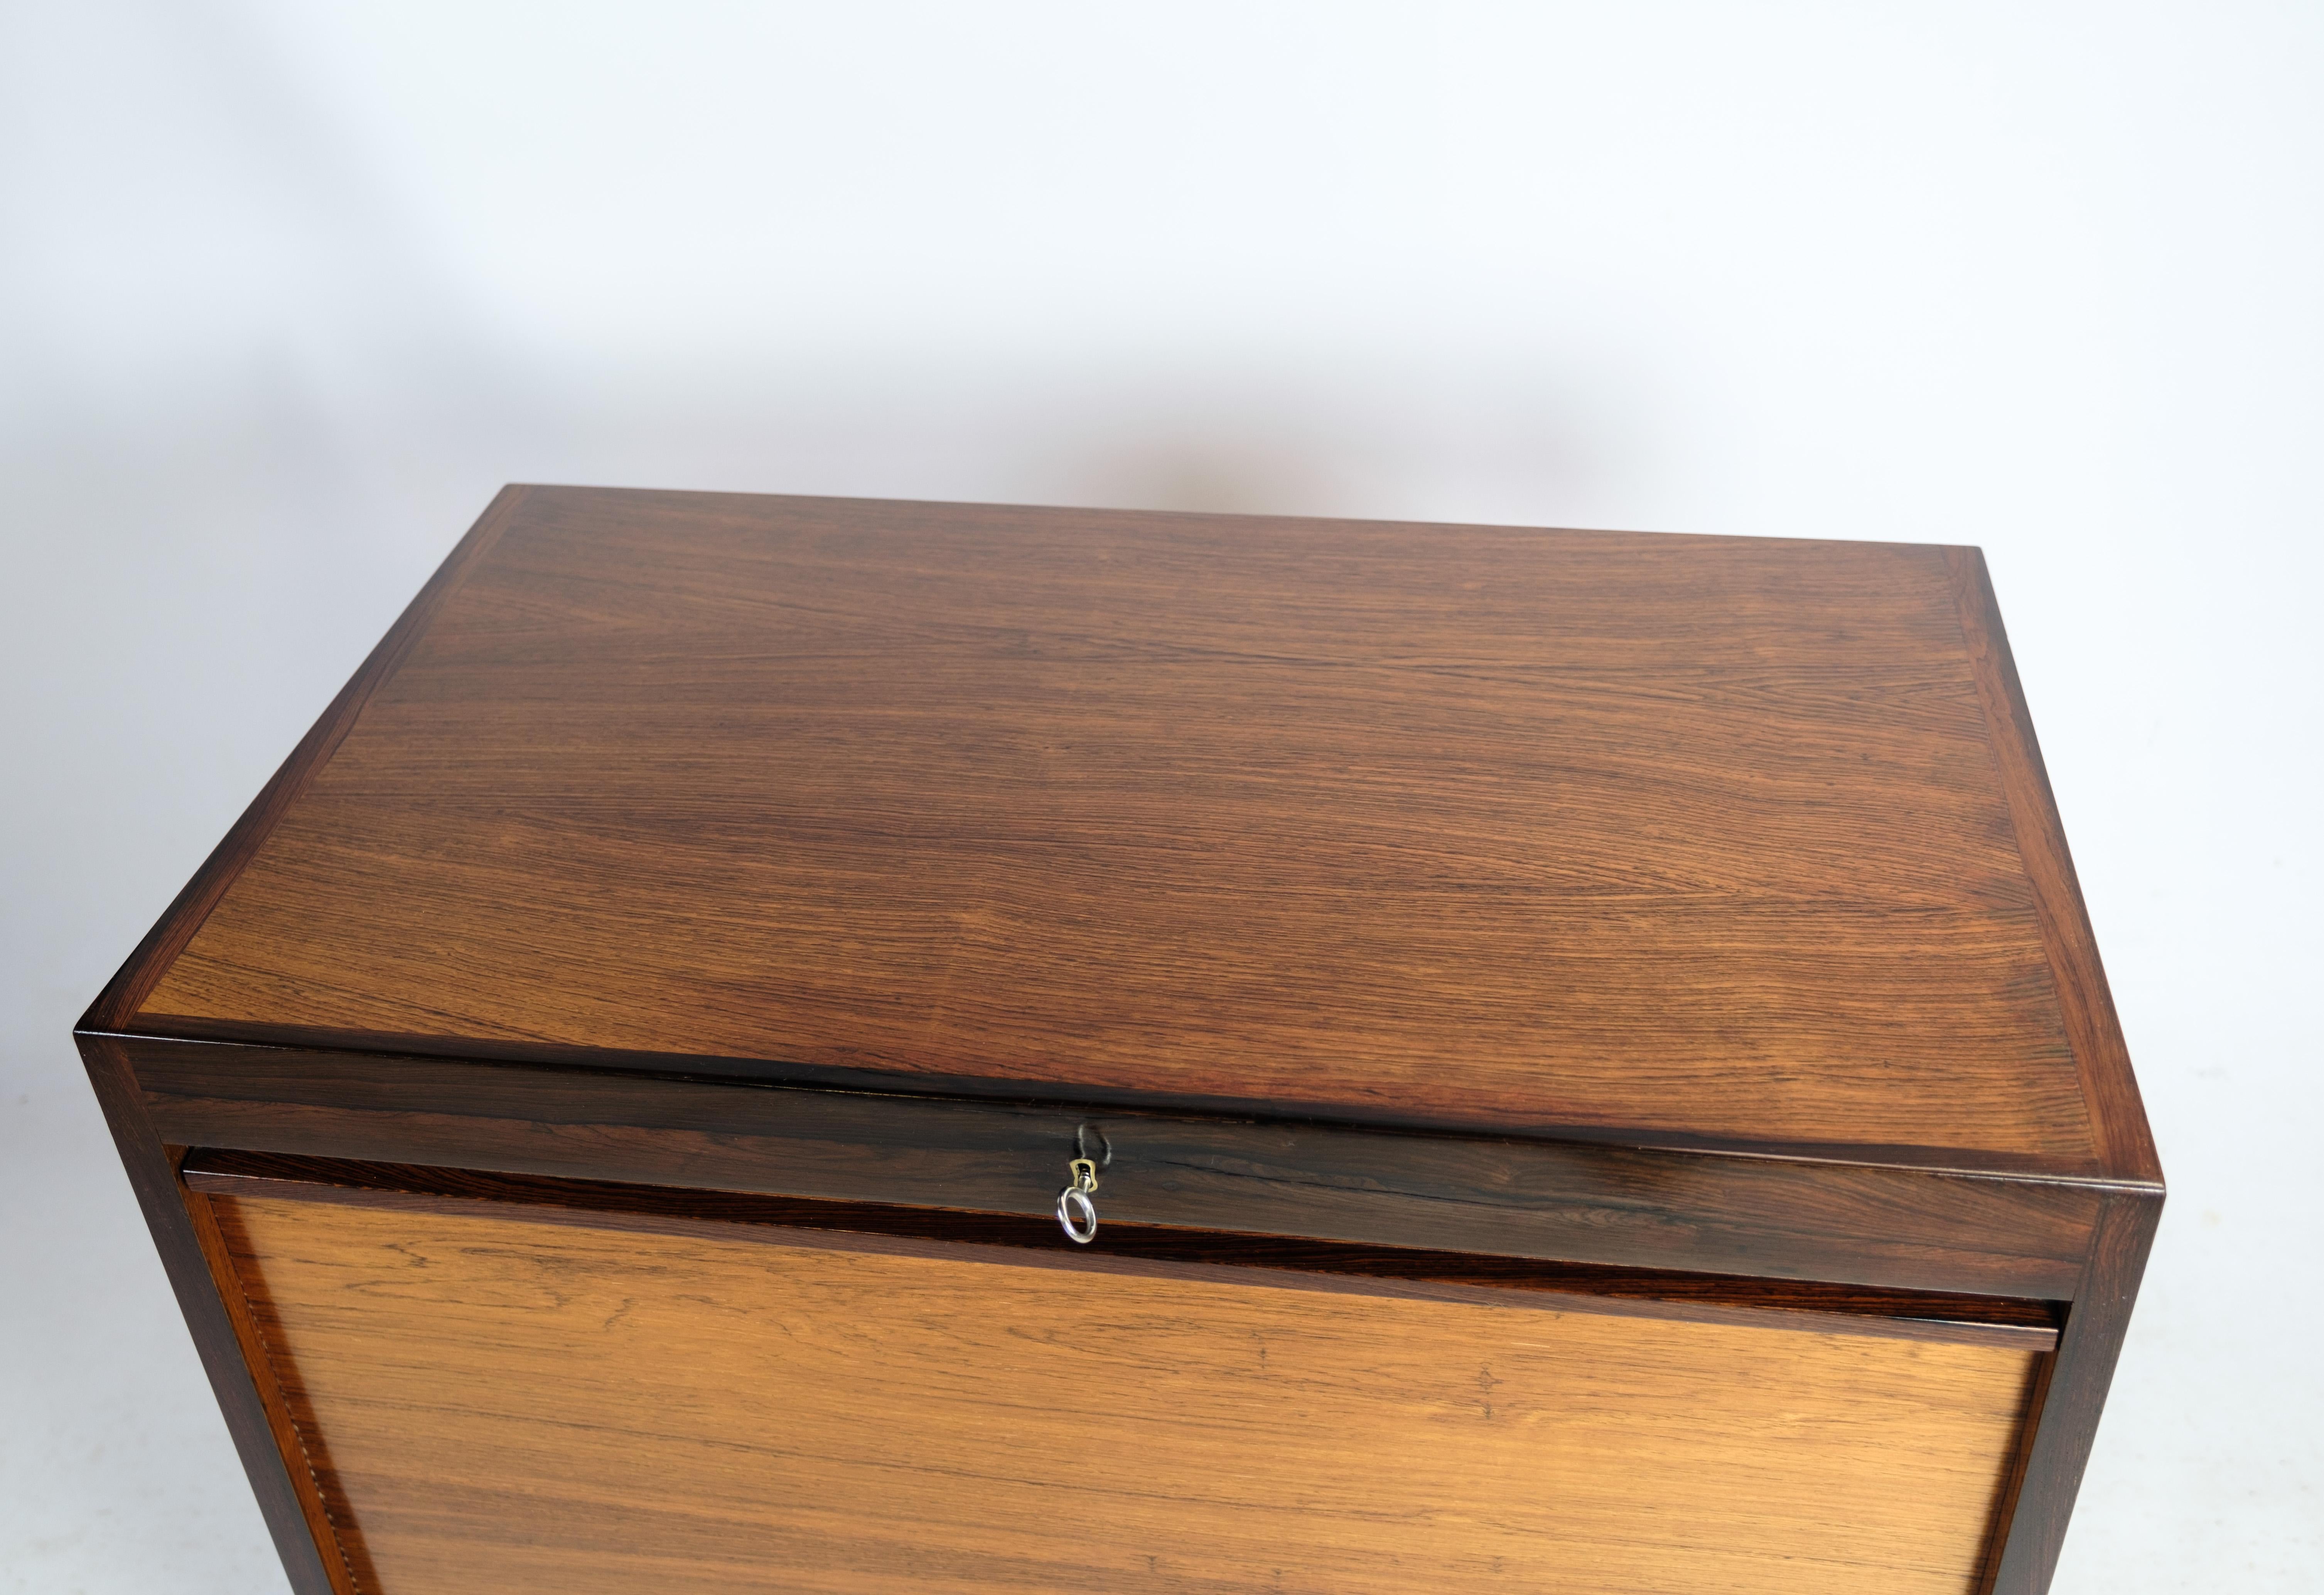 Cabinet with pull-up door in rosewood of danish design from the 1960s. The cabinet is in great vintage condition.

This product will be inspected thoroughly at our professional workshop by our educated employees, who assure the product quality.
 